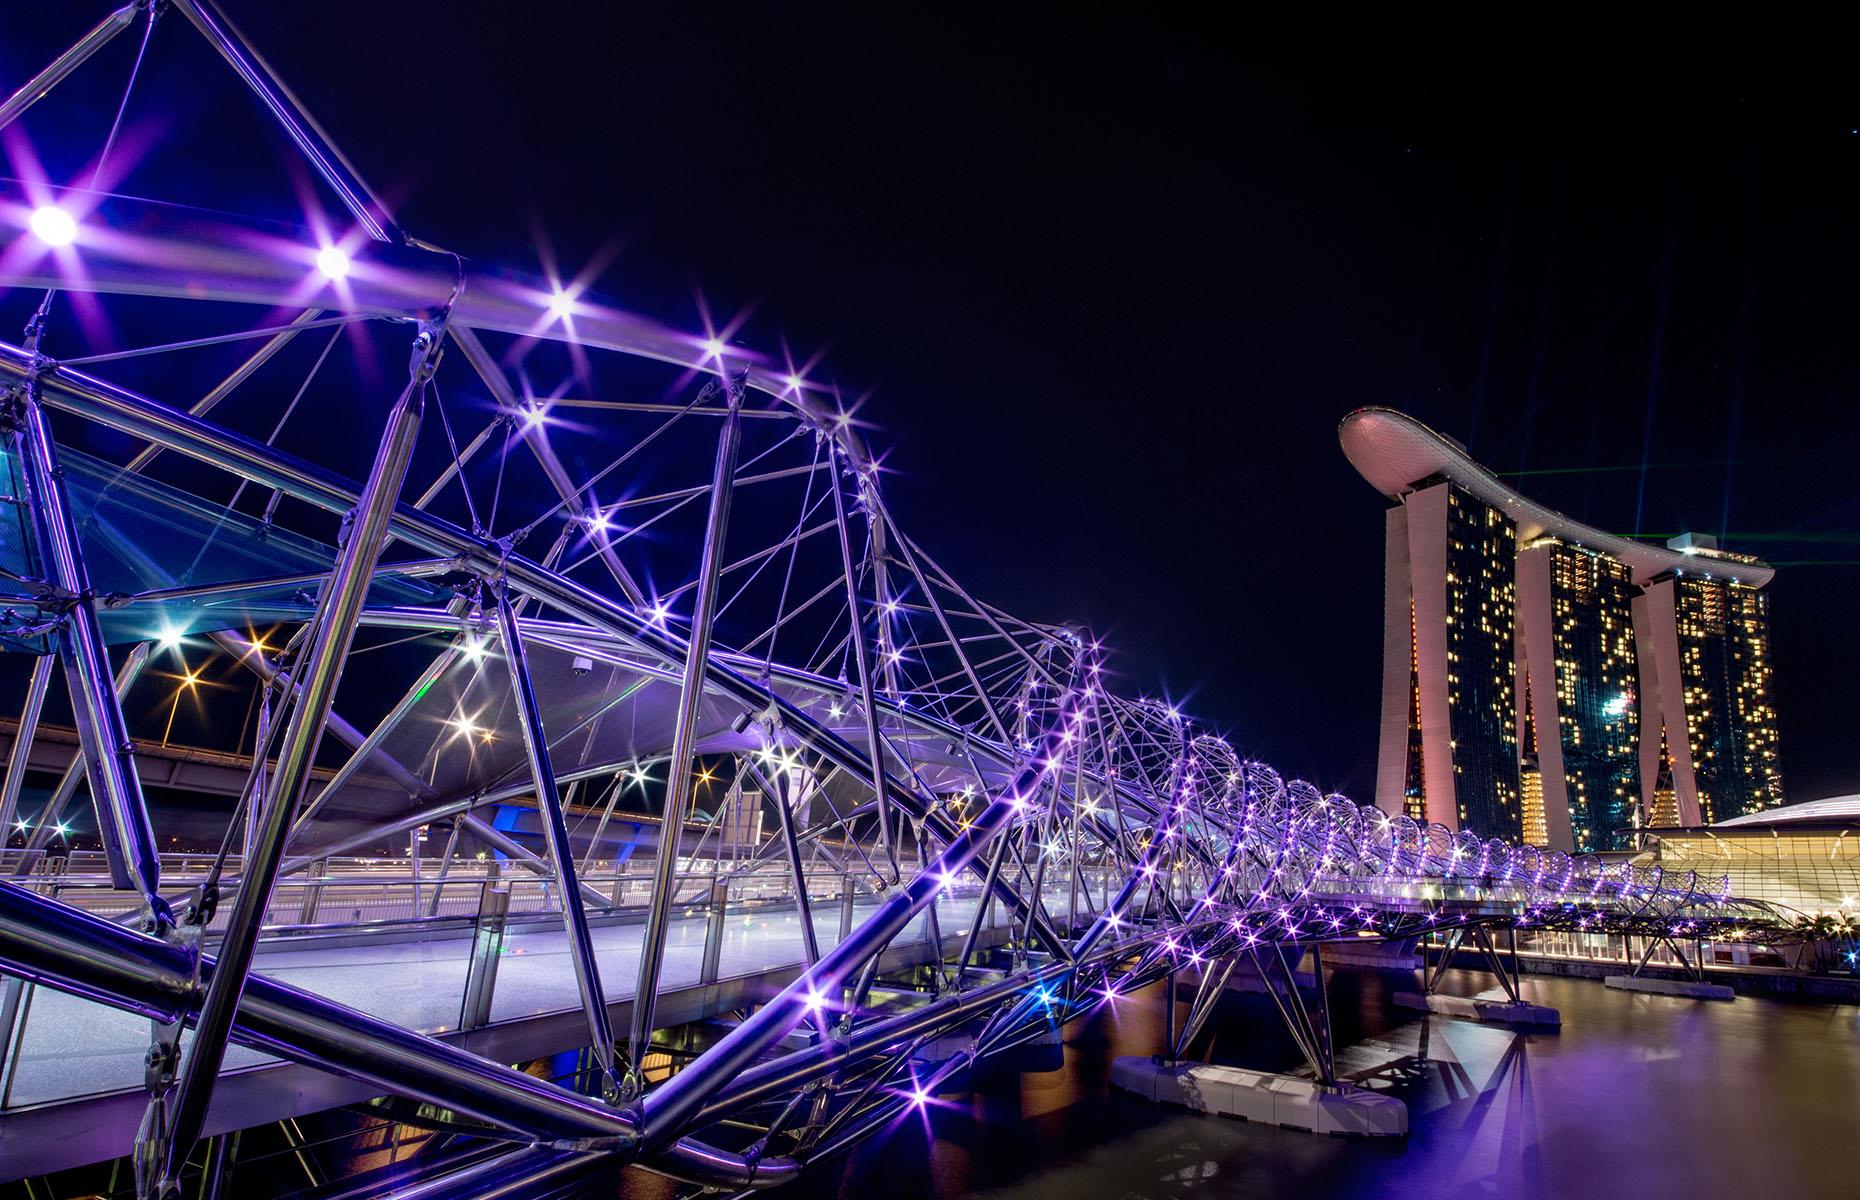 This 919-foot-long (28m) curved, double helix bridge is the first of its kind in the world. Linking the Marina Centre with Marina South, a wander across this DNA structure-inspired walkway is a must. It’s particularly spectacular at night, when the stainless steel is lit up in blue, so get your camera ready but take advantage of the four viewing platforms on each side so you don’t get in anyone’s way. Spanning the Singapore River, it’s become a standout landmark ever since it opened in 2010.